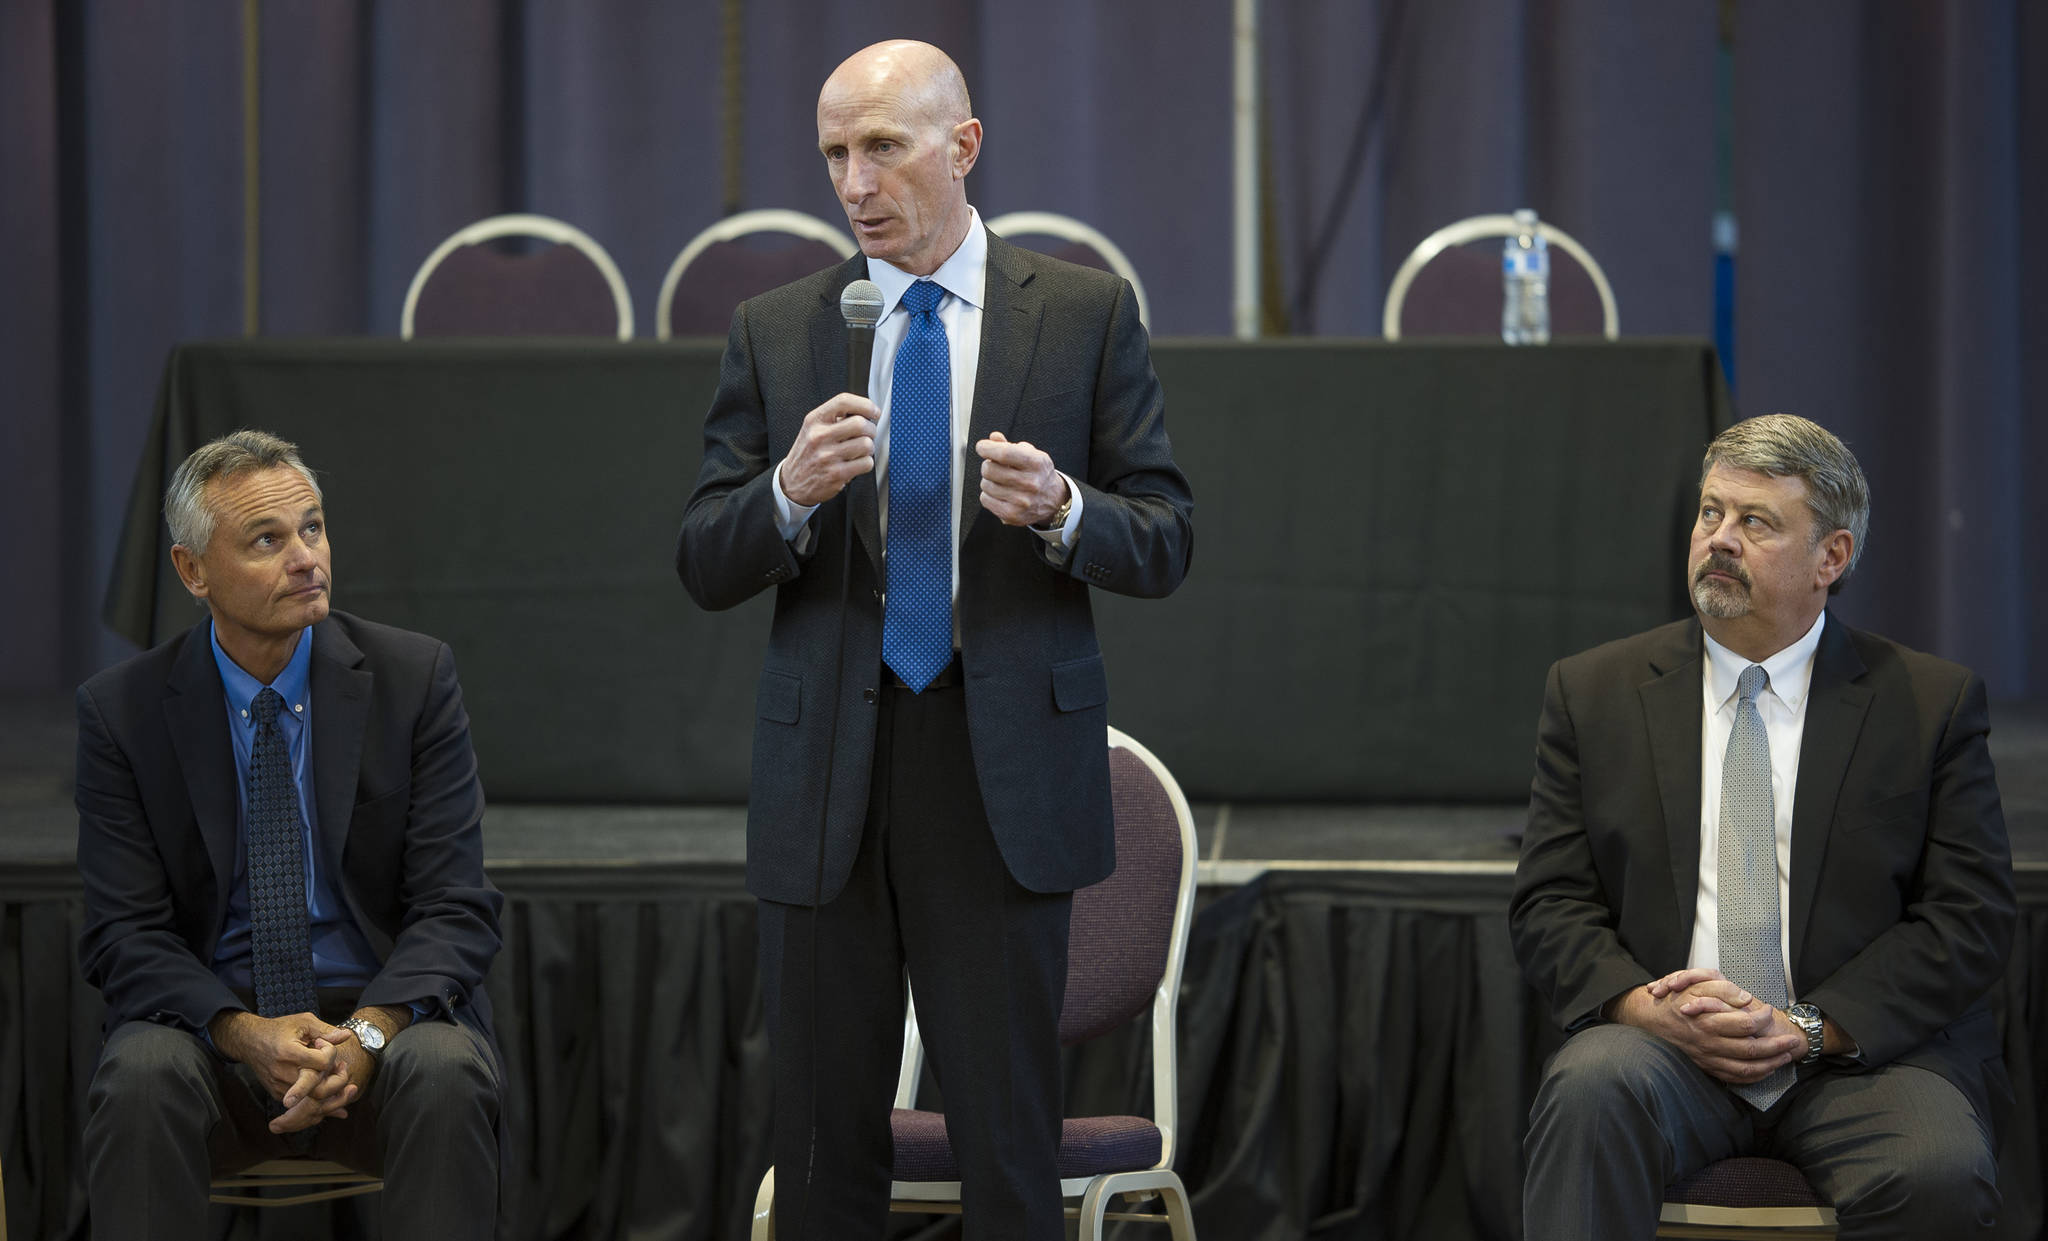 Mayo Schmidt, President and CEO of Hydro One Limited, center, gives an overview of the Ontario-based electric utility as Scott Morris, Avista Chairman, President and CEO, left, and Dennis Vermillion, Senior Vice President of Avista Corp. and President of Avista Utilities, listen during a public meeting with leadership from Hydro One, Avista and AEL&P at the Juneau Arts and Culture Center on Thursday, Jan. 18, 2018. (Michael Penn | Juneau Empire)